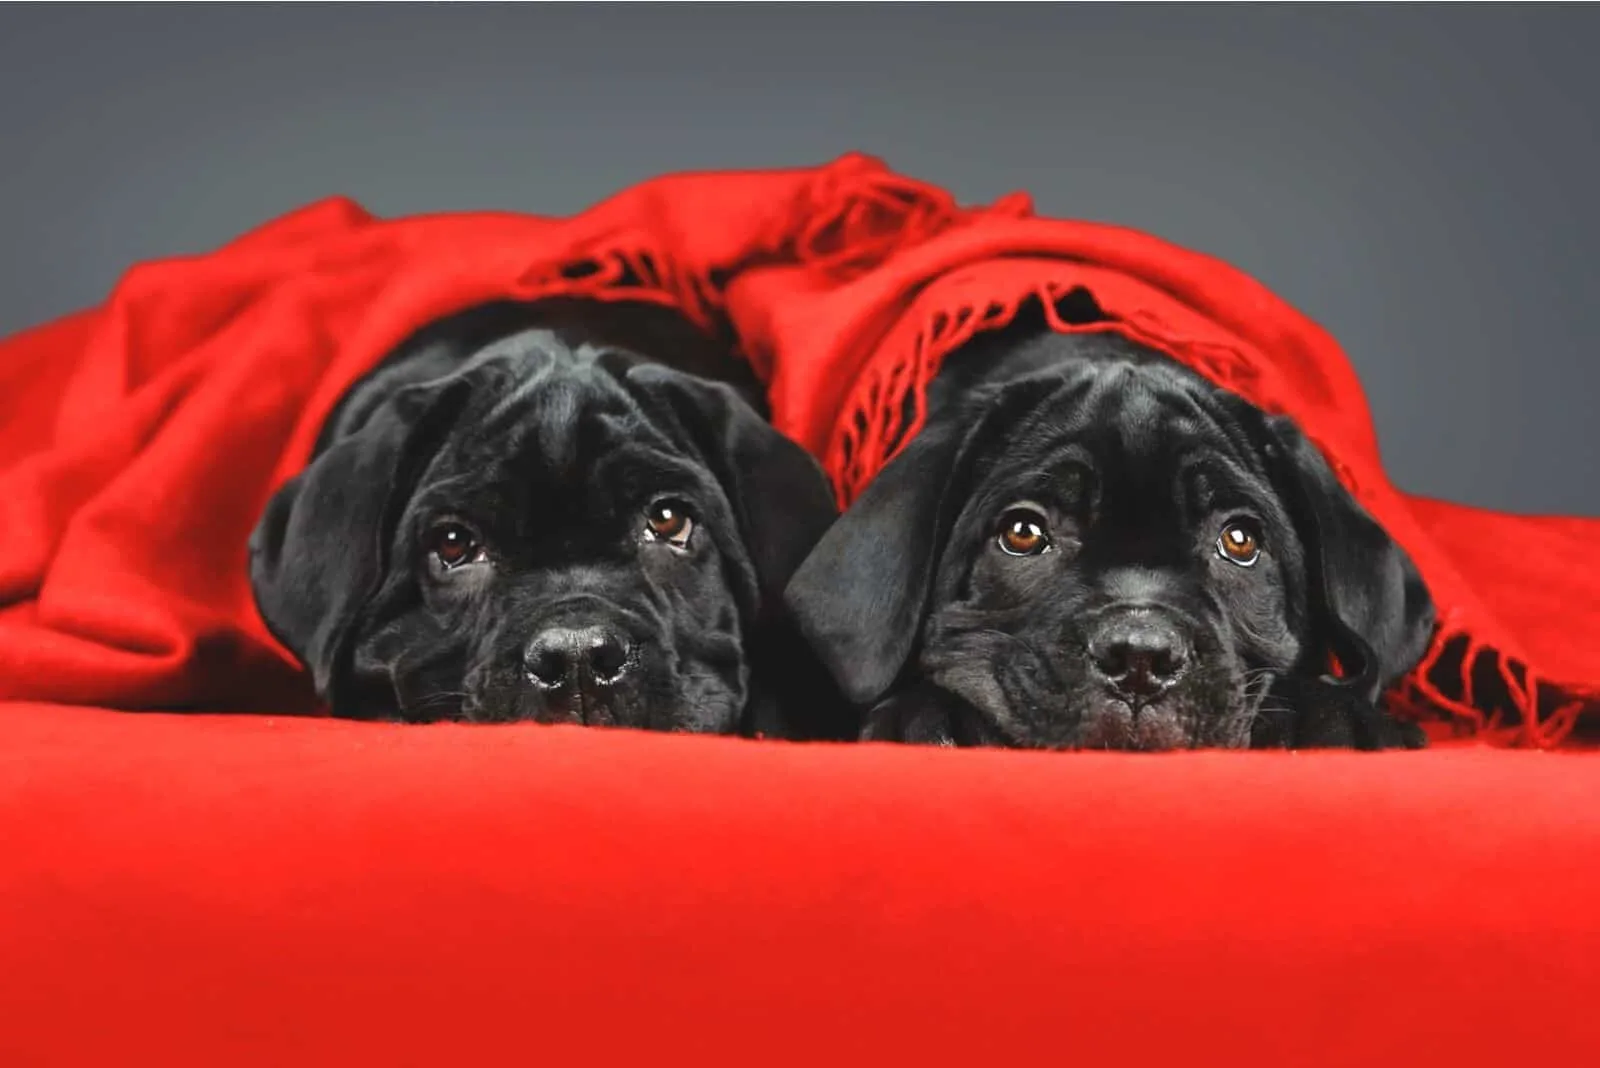 two black cane corso puppies under red blanket